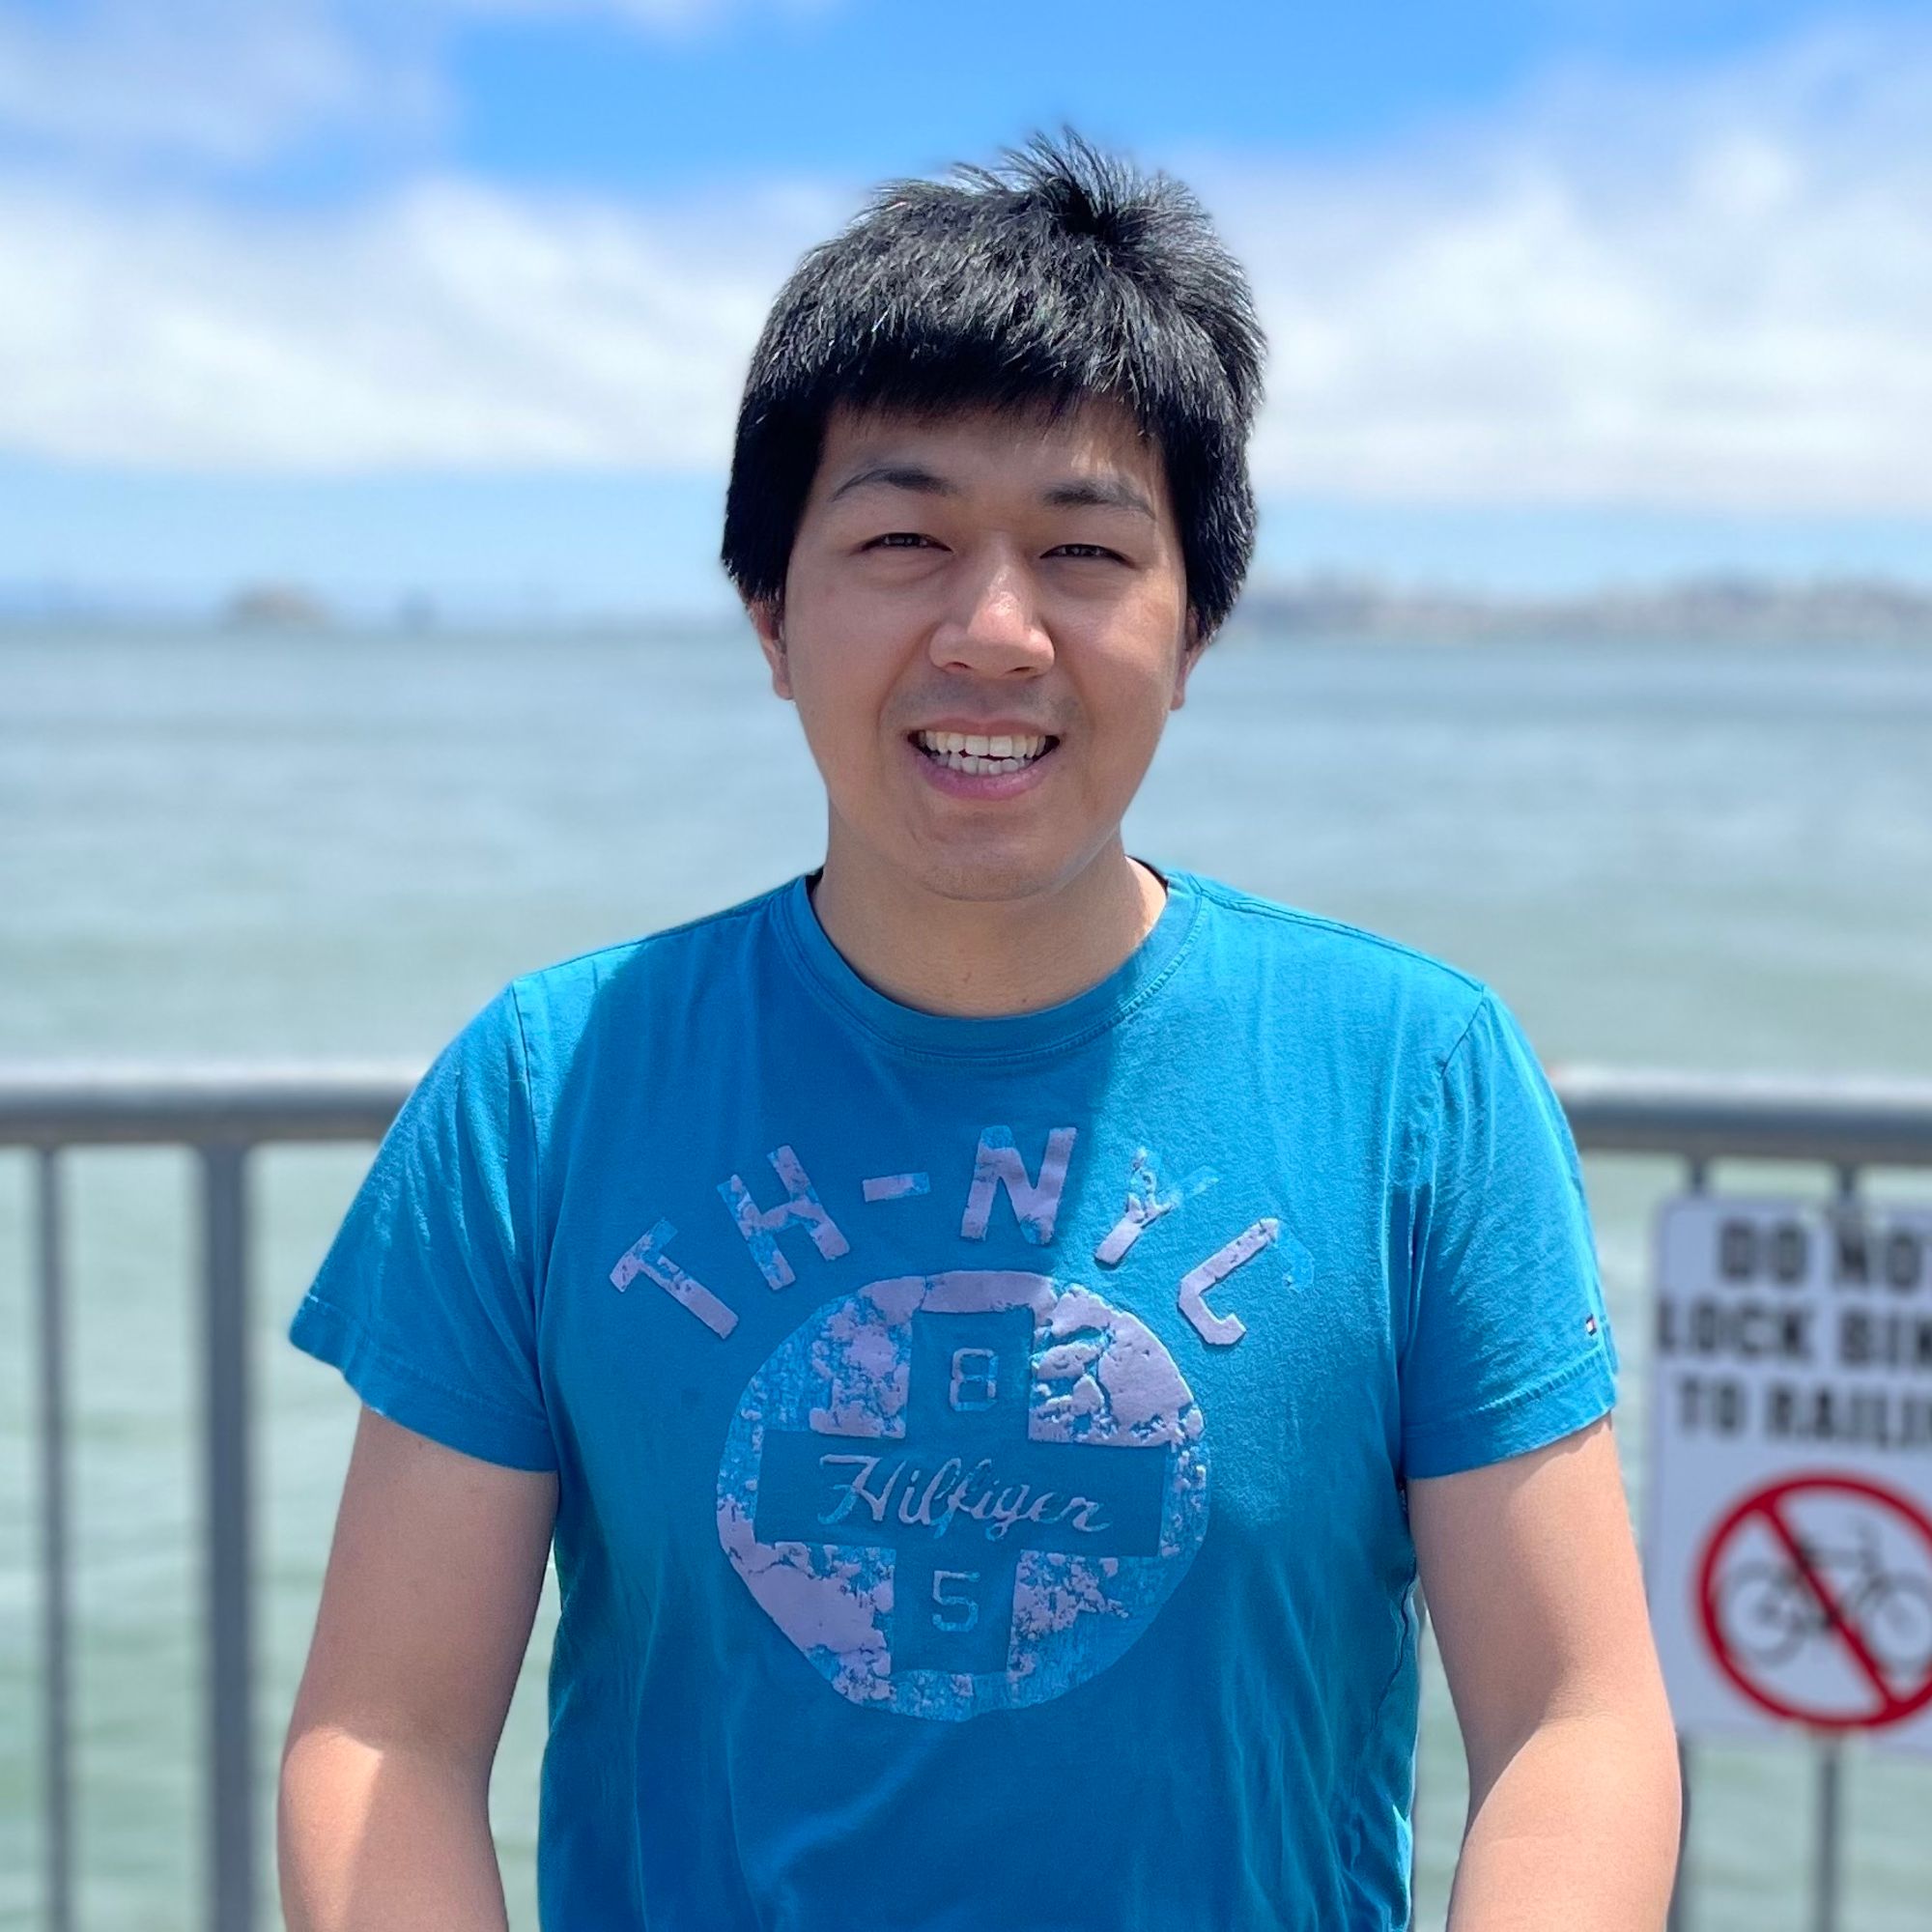 Jimmy Zhuang 
Software Engineer 
Prior Staff Engineer and Eng. Manager @Airbnb, #1 code contributor @Airbnb, Ex-Facebook • Loves McDonald's chicken nuggets